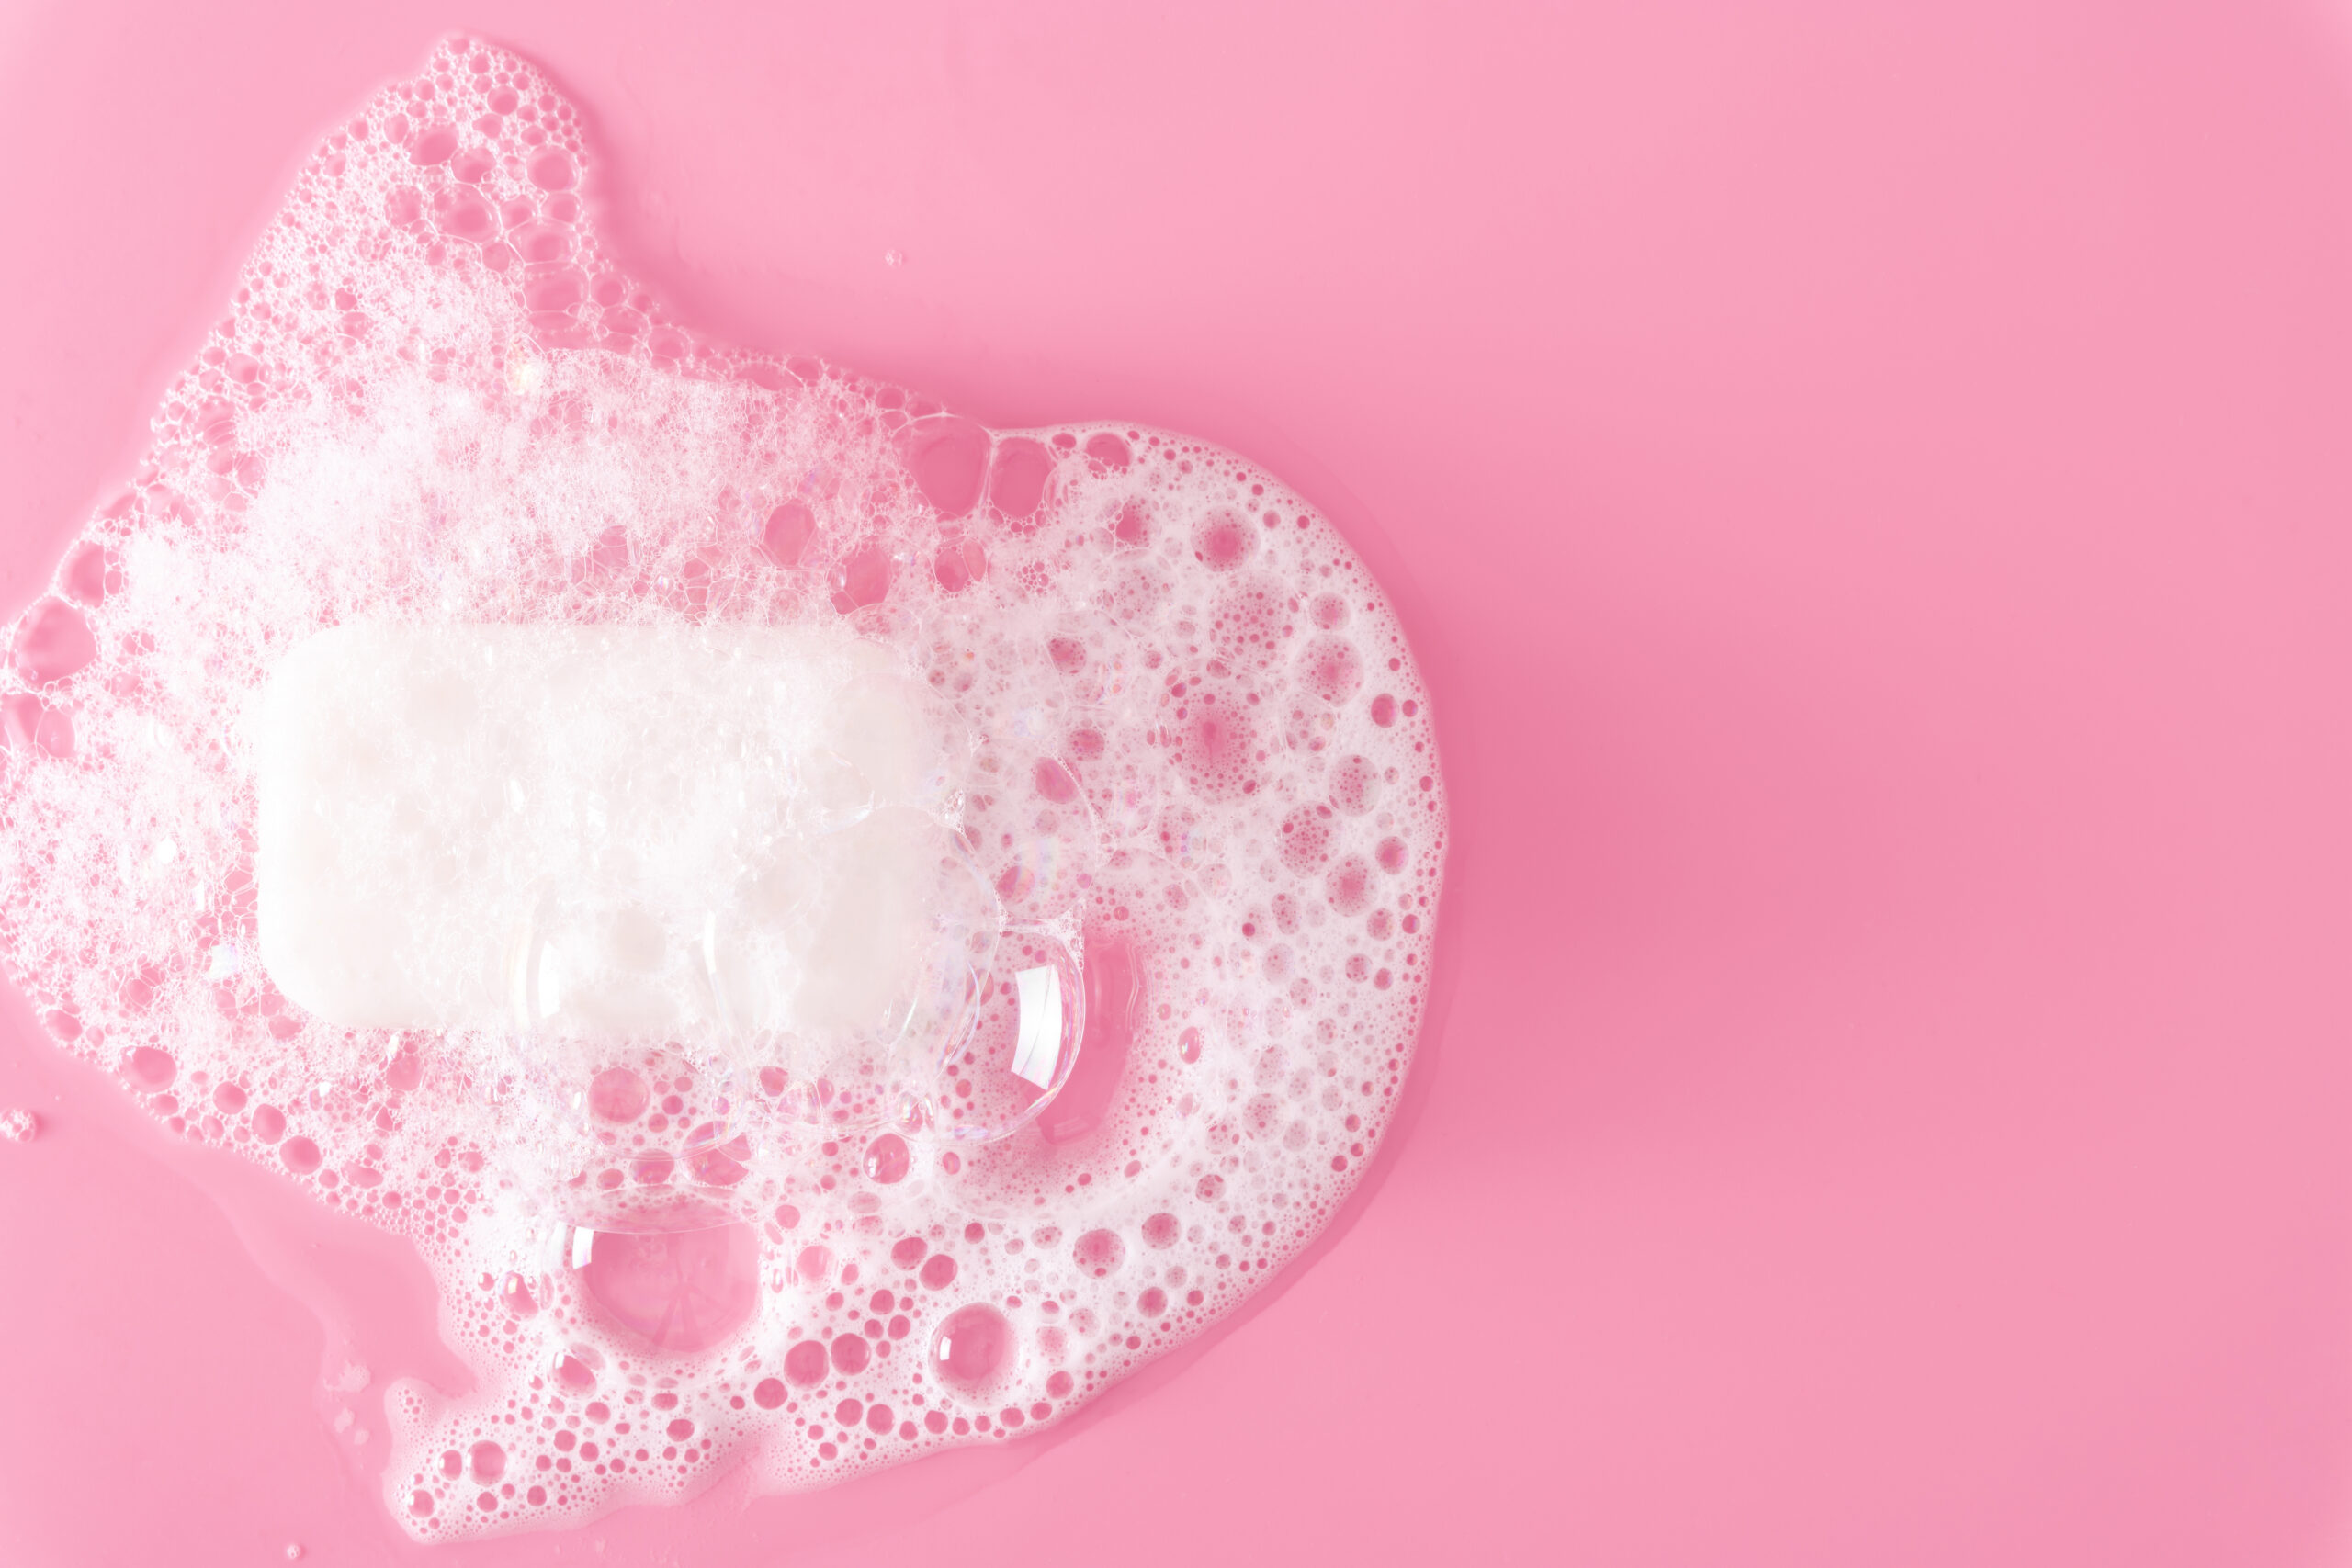 White,Soap,Bar,And,Foam,On,Pastel,Pink,Background.,Flat